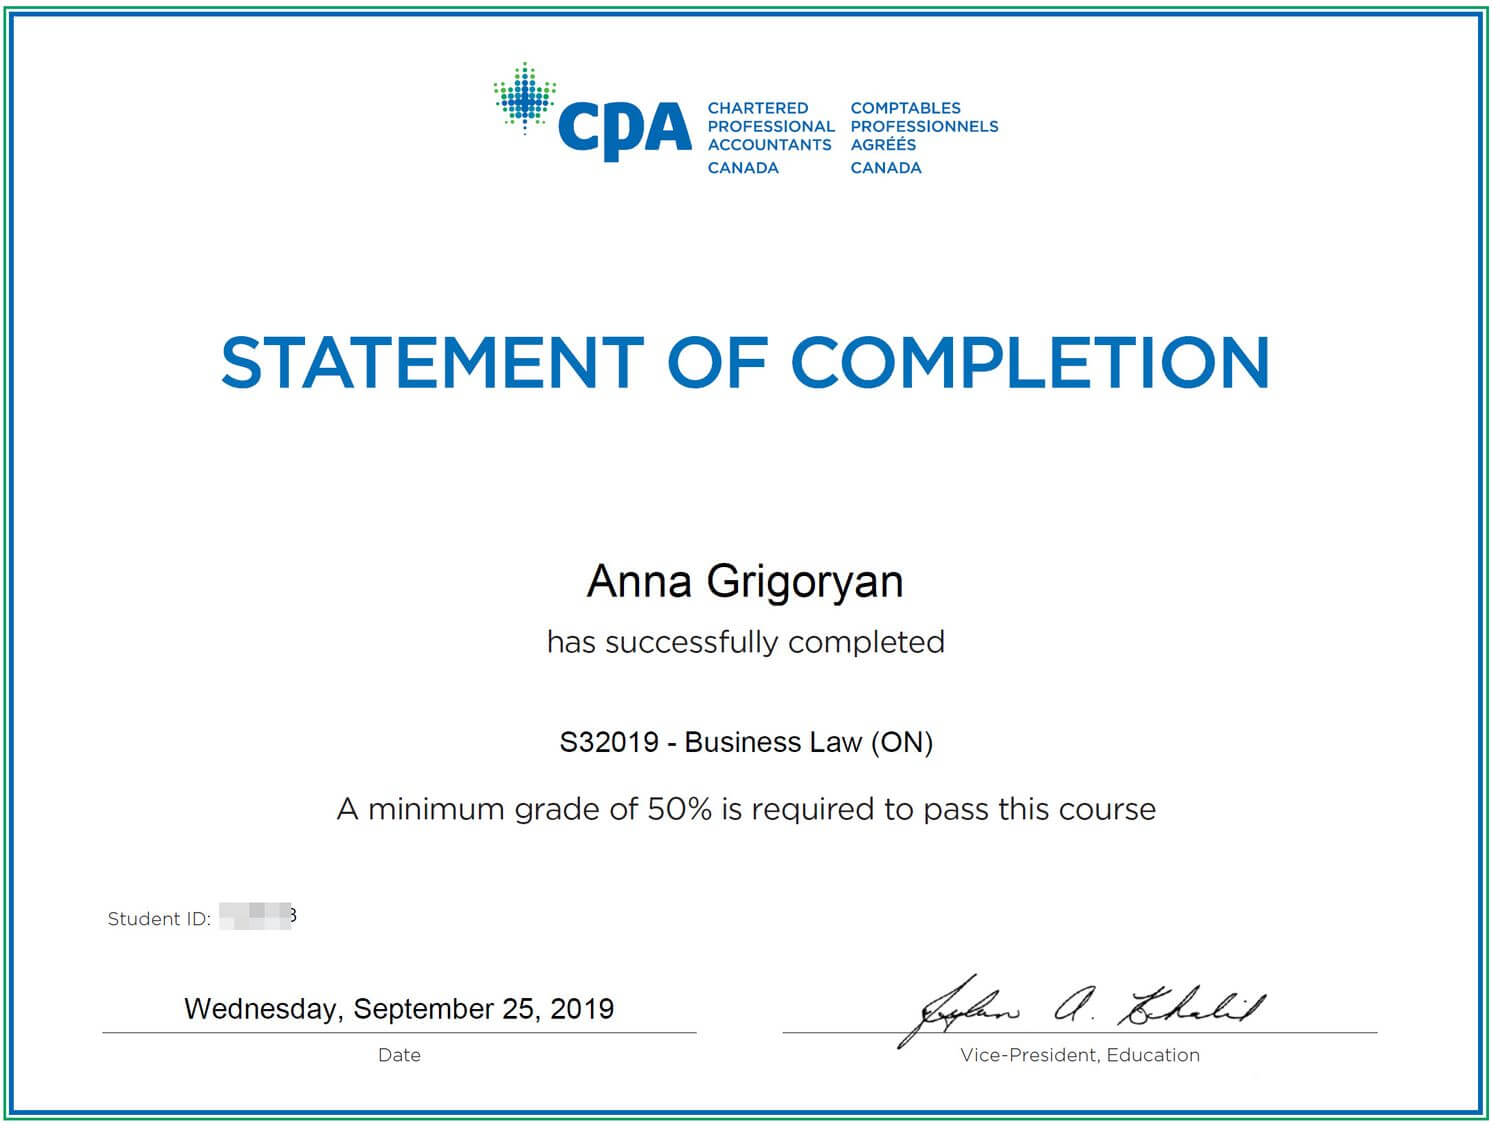 Business Law CPA certificate for accountant Anna Grigoryan 